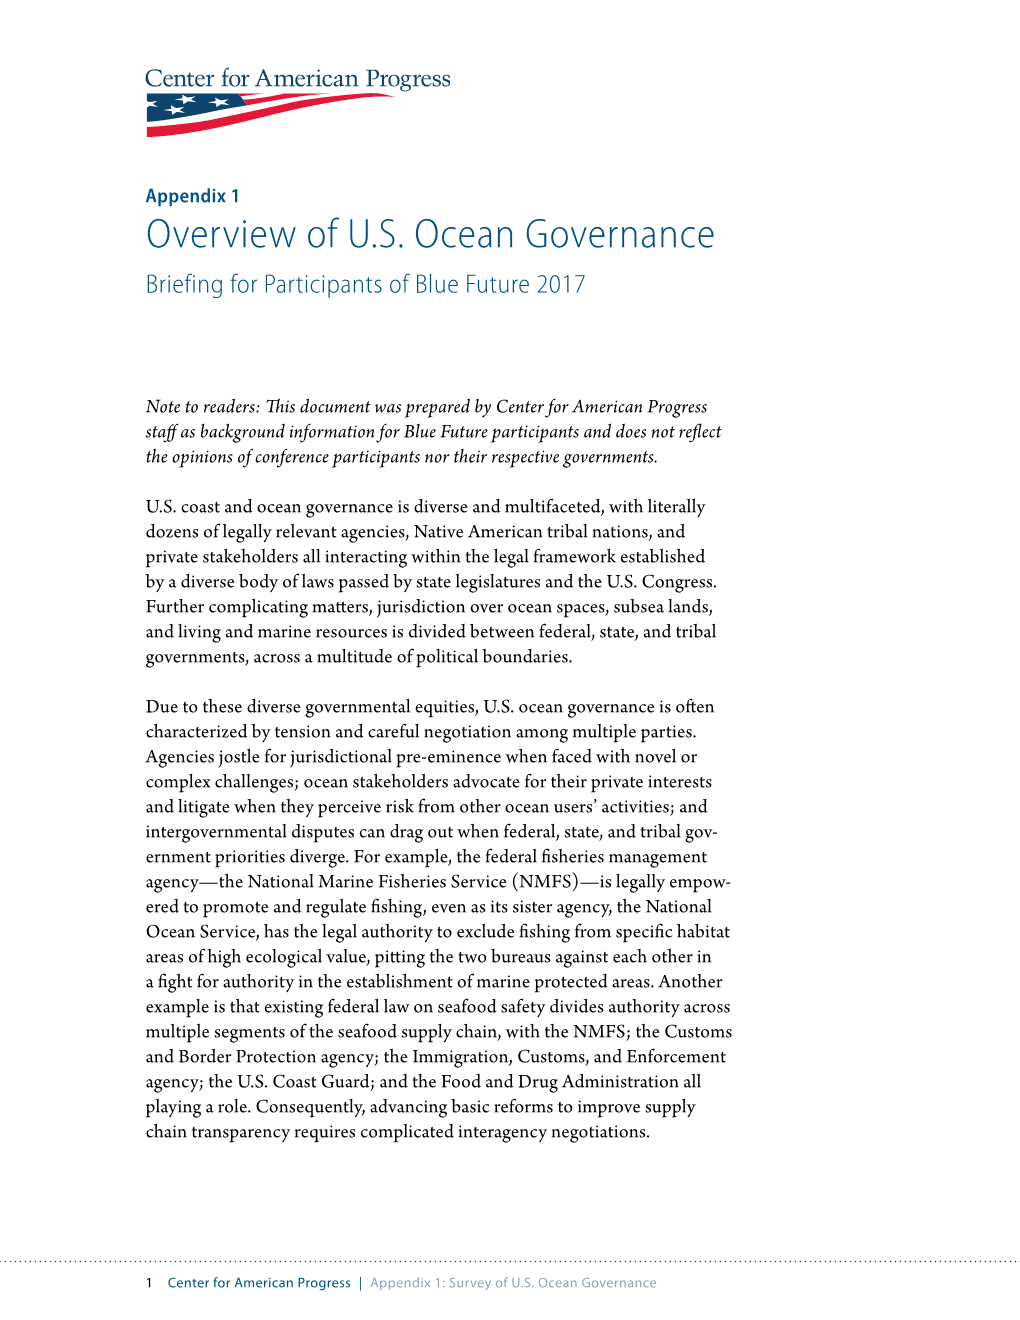 Overview of U.S. Ocean Governance Briefing for Participants of Blue Future 2017